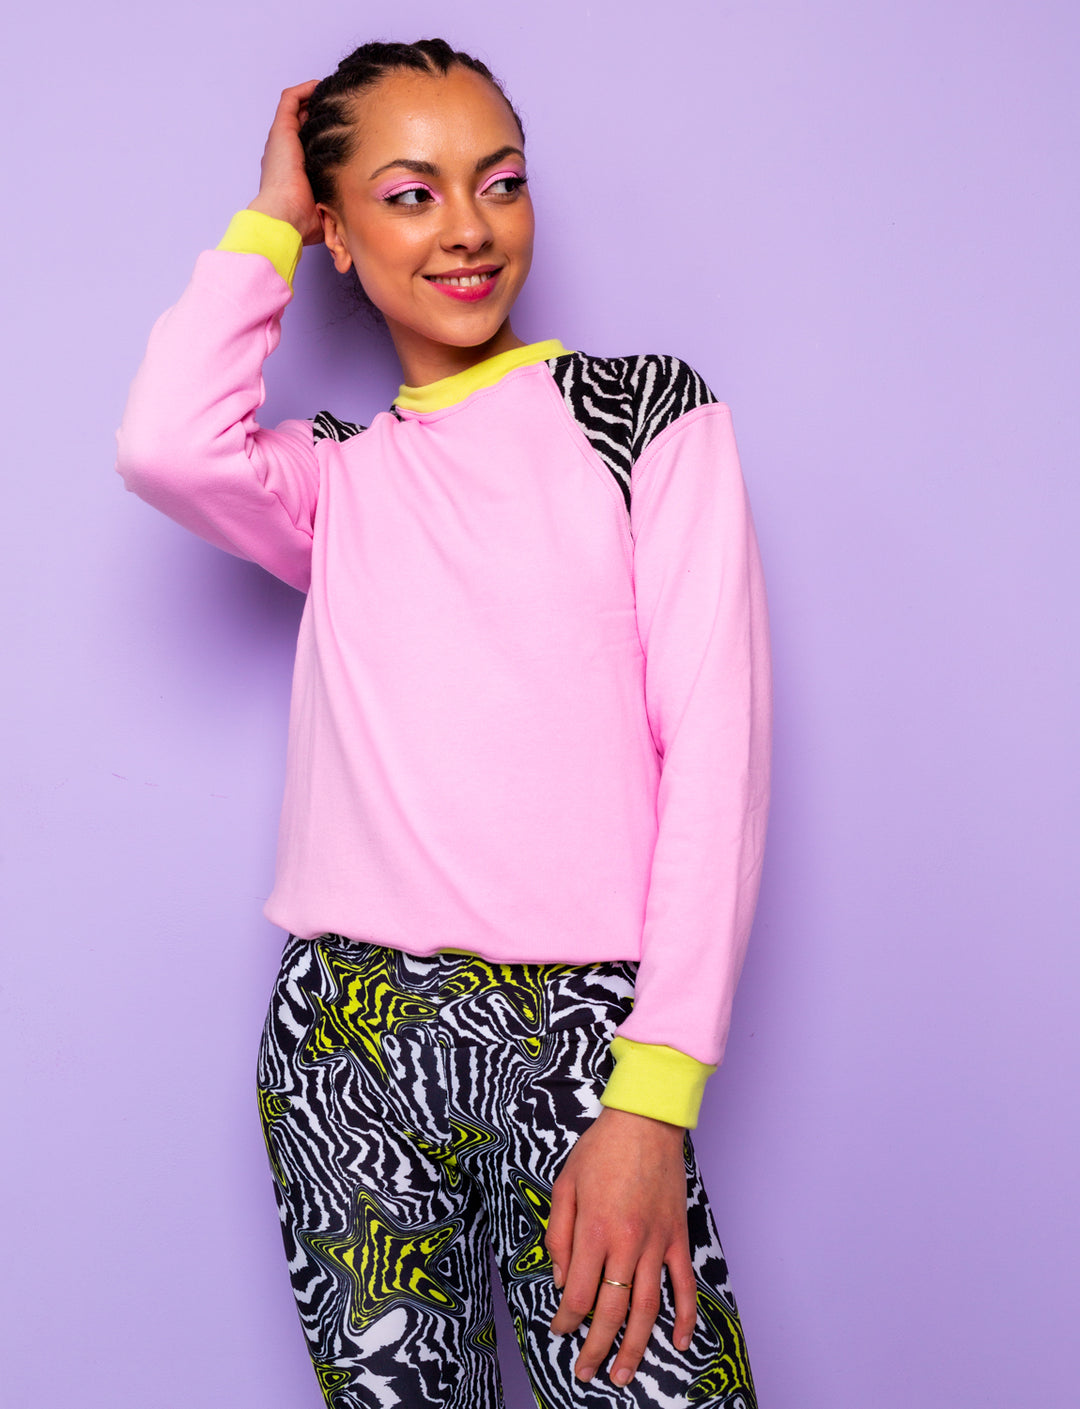 woman wearing a pink sweatshirt with zebra prints shoulders tucked in at the waist